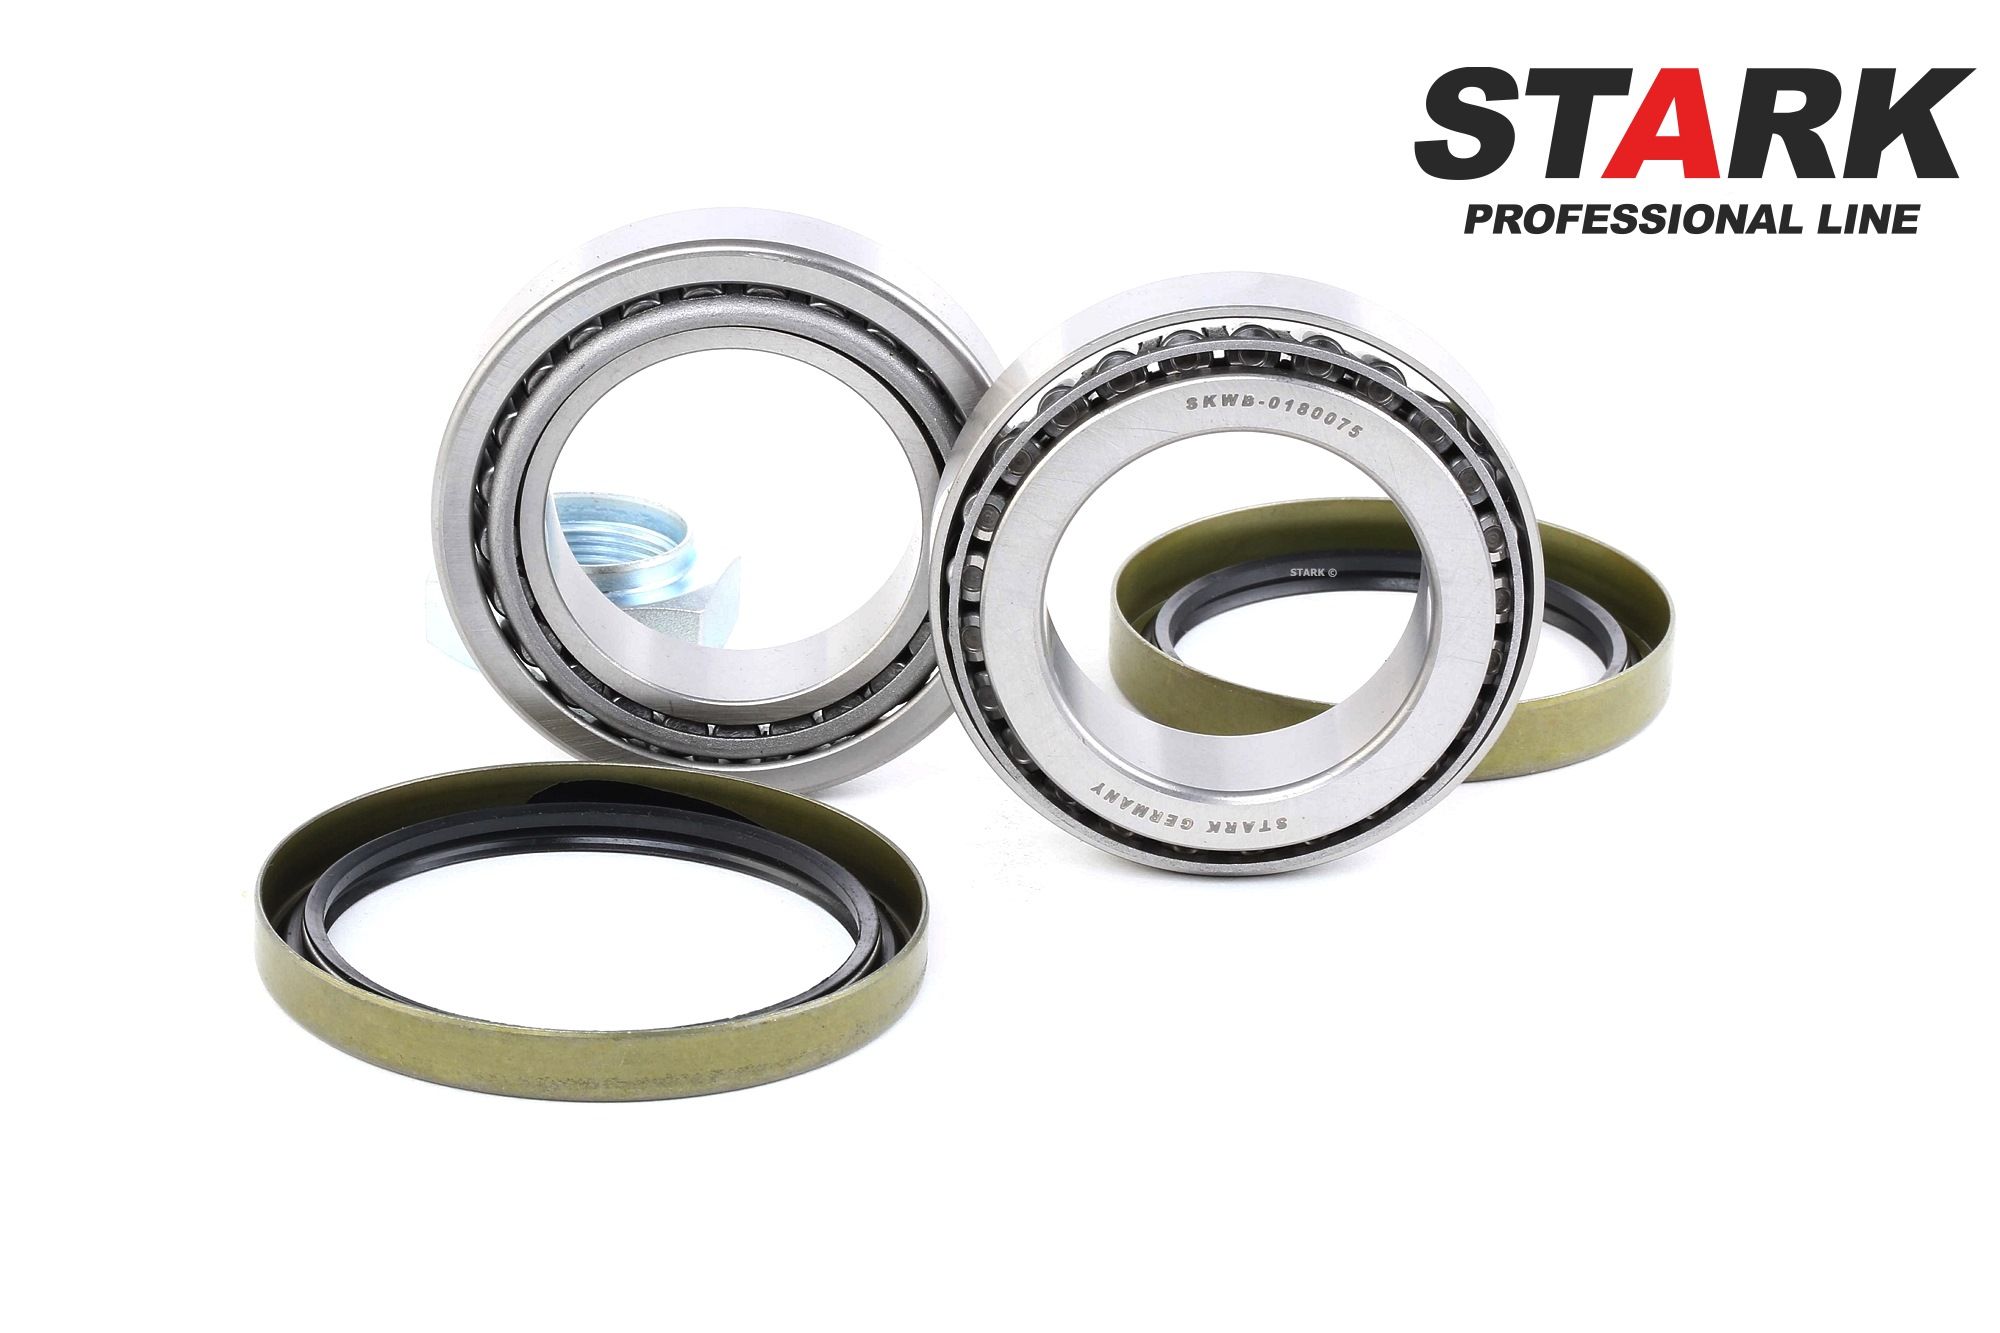 STARK SKWB-0180075 Wheel bearing kit Front axle both sides, without ABS sensor ring, 80 mm